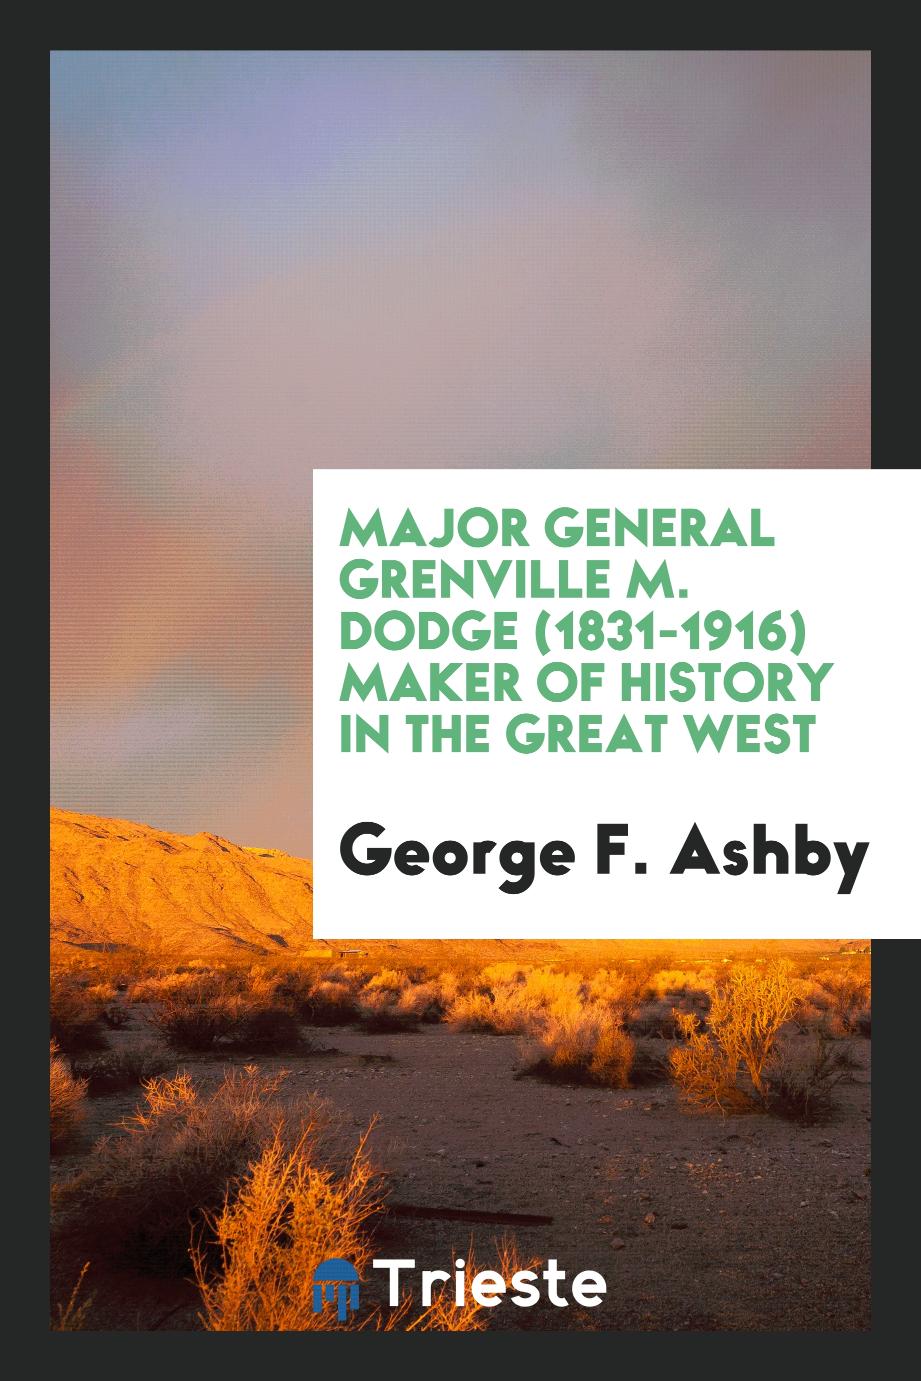 Major General Grenville M. Dodge (1831-1916) Maker of History in the Great West